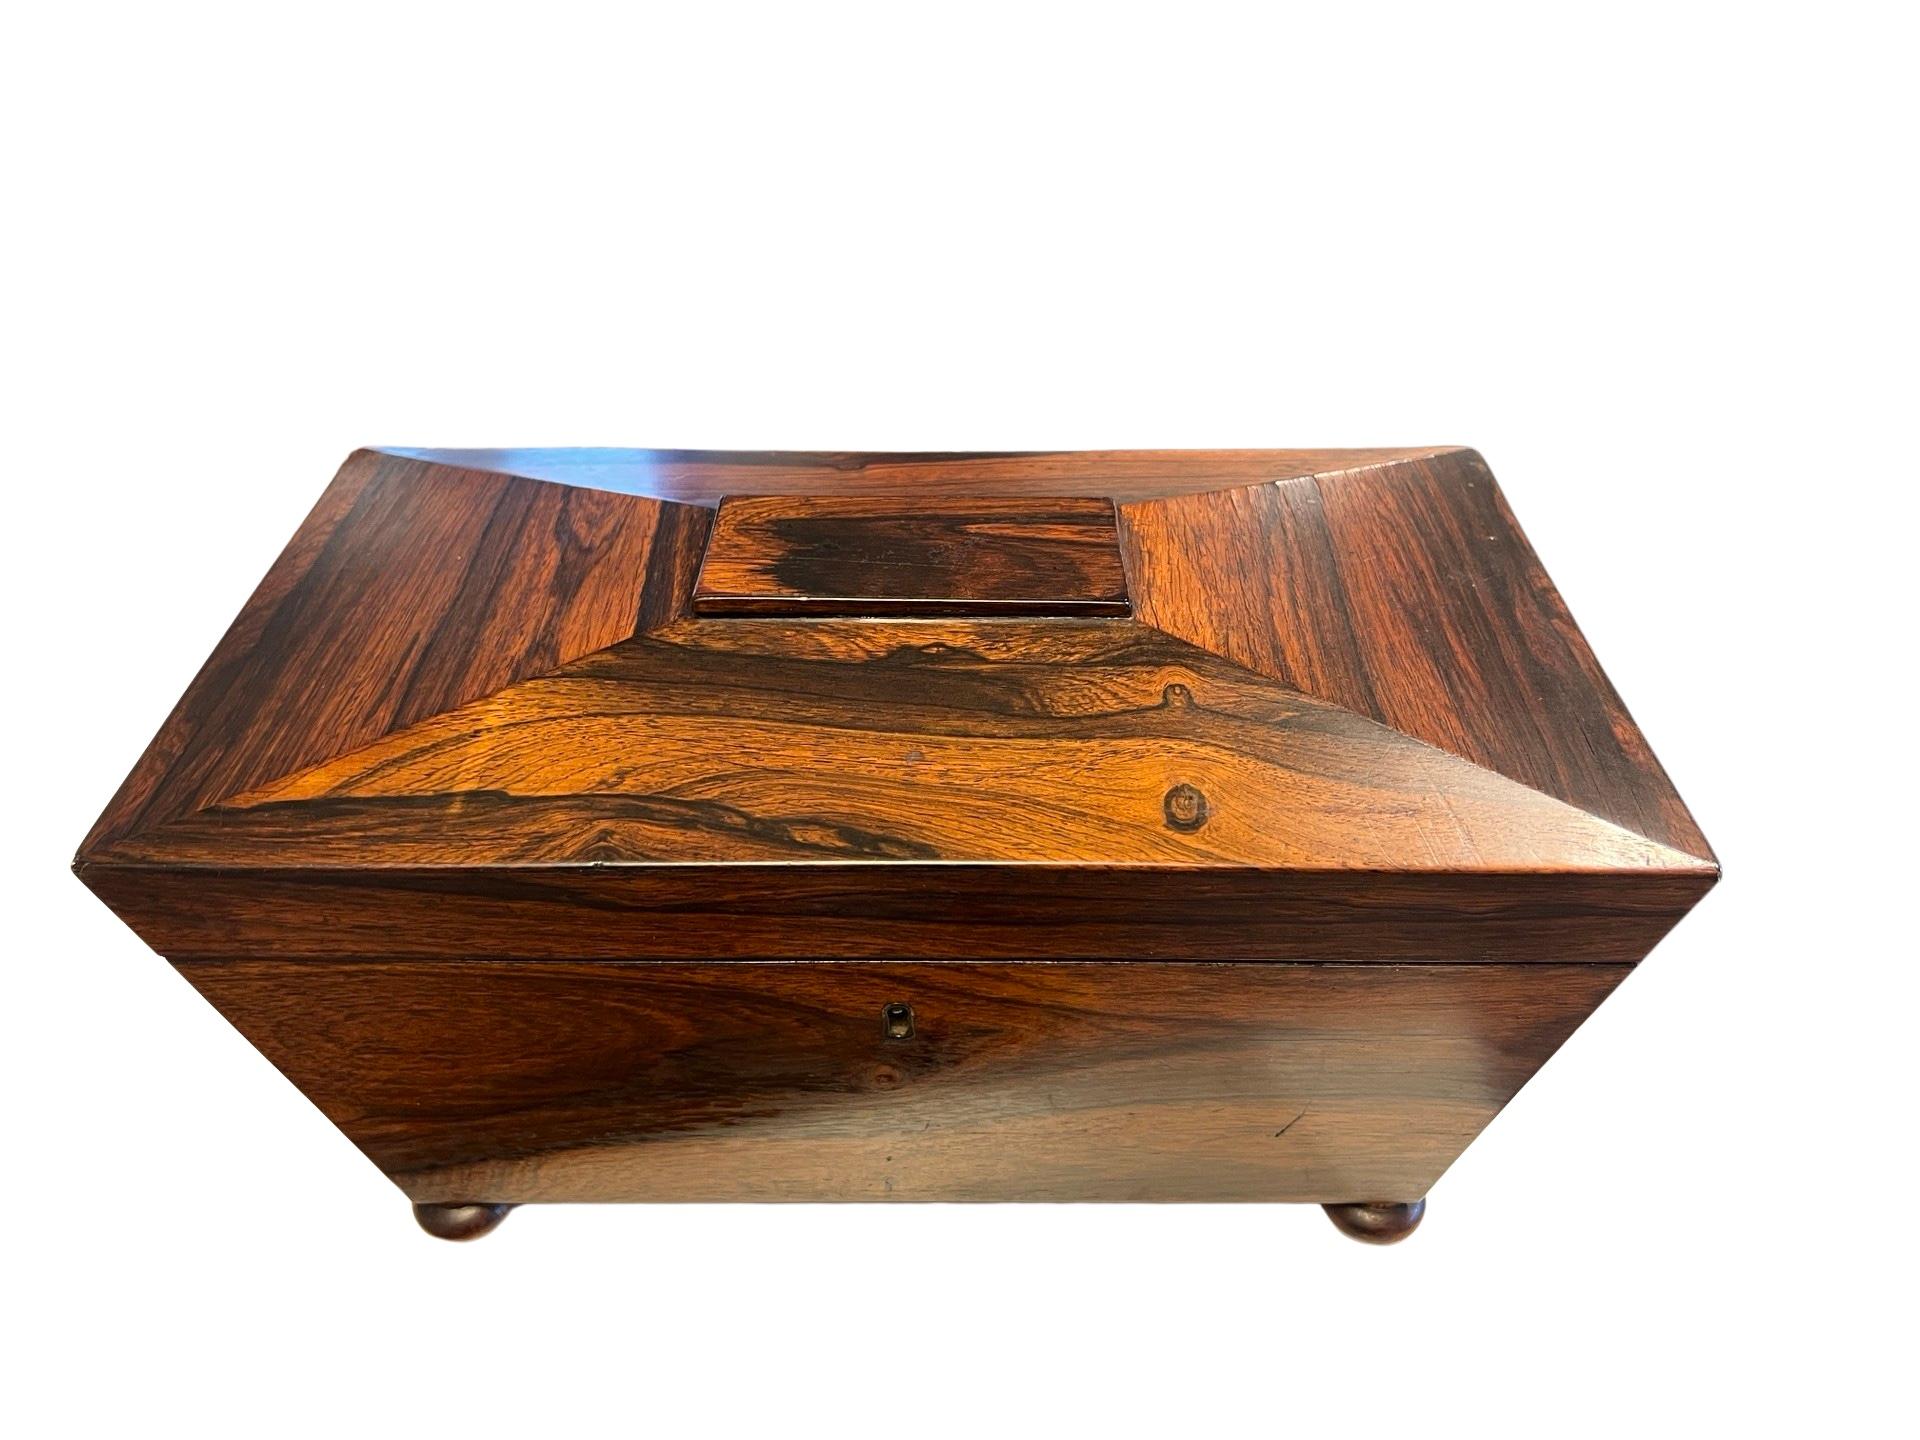 England, circa 1880.

A large sarcophagus form tea caddy box in mahogany. Resting on four bun feet and opens to reveal a tin lined casing, two covered tea sections and a central crystal bowl. 